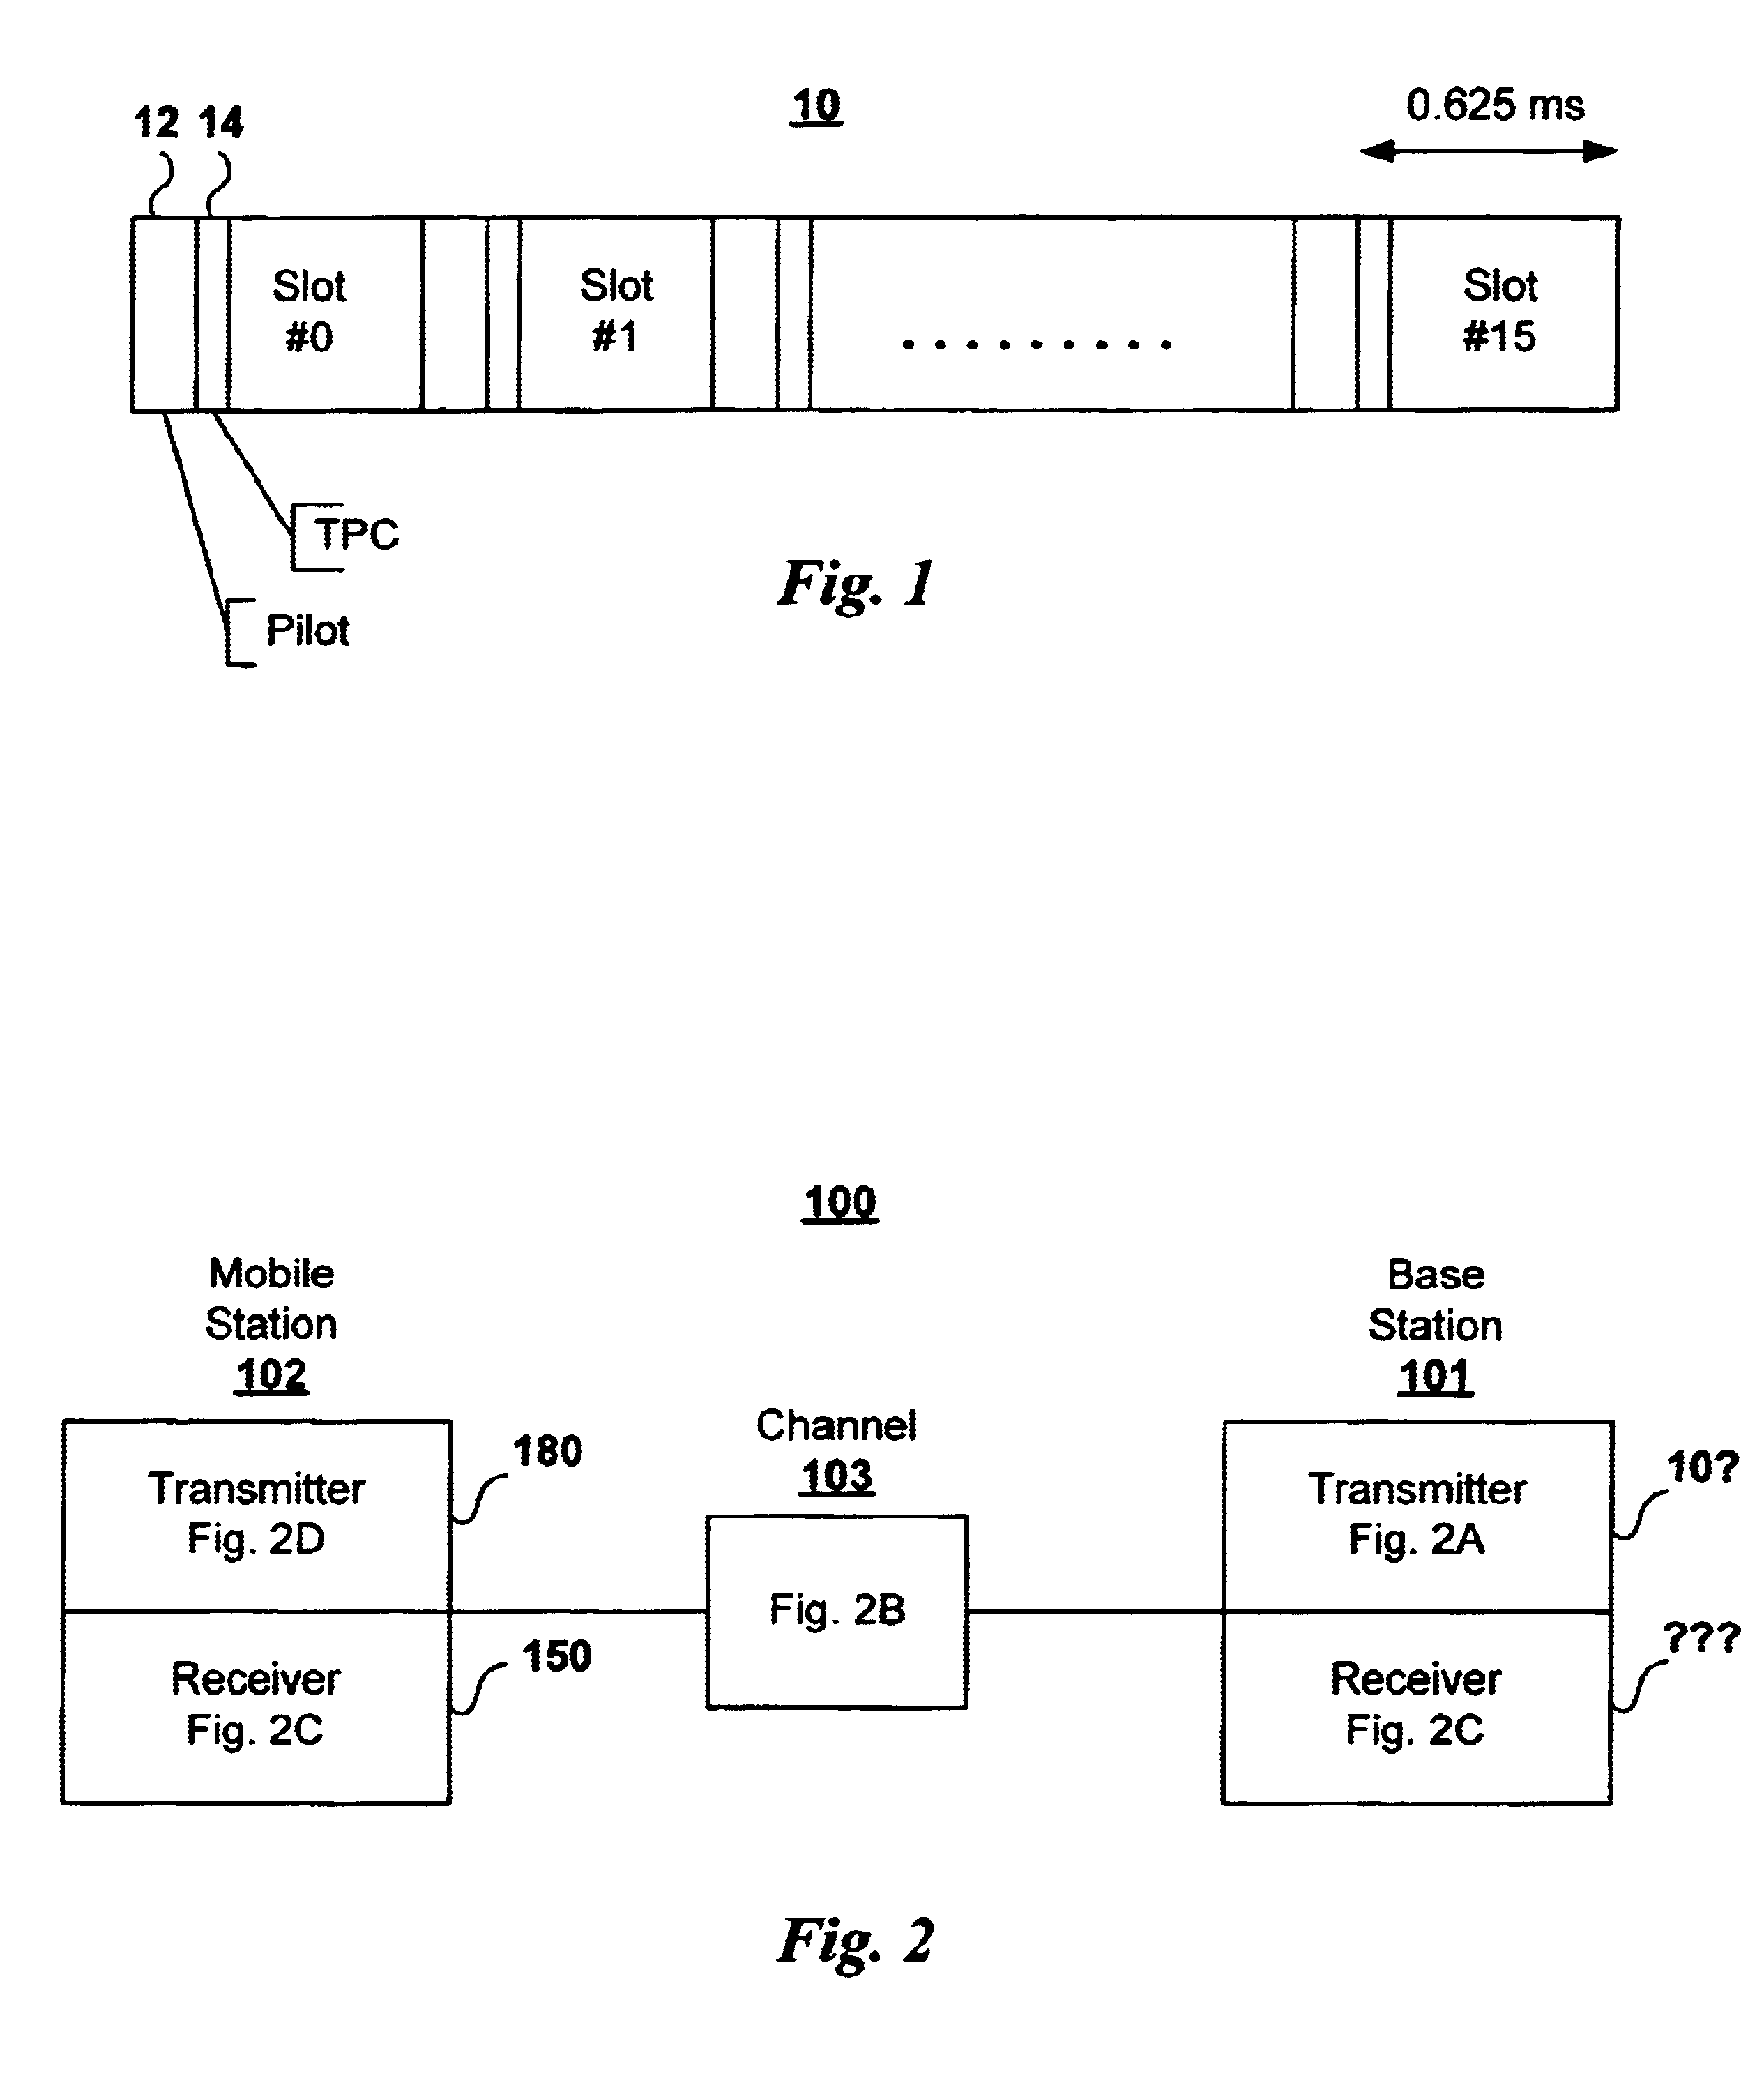 Adaptive power control based on a rake receiver configuration in wideband CDMA cellular systems (WCDMA) and methods of operation